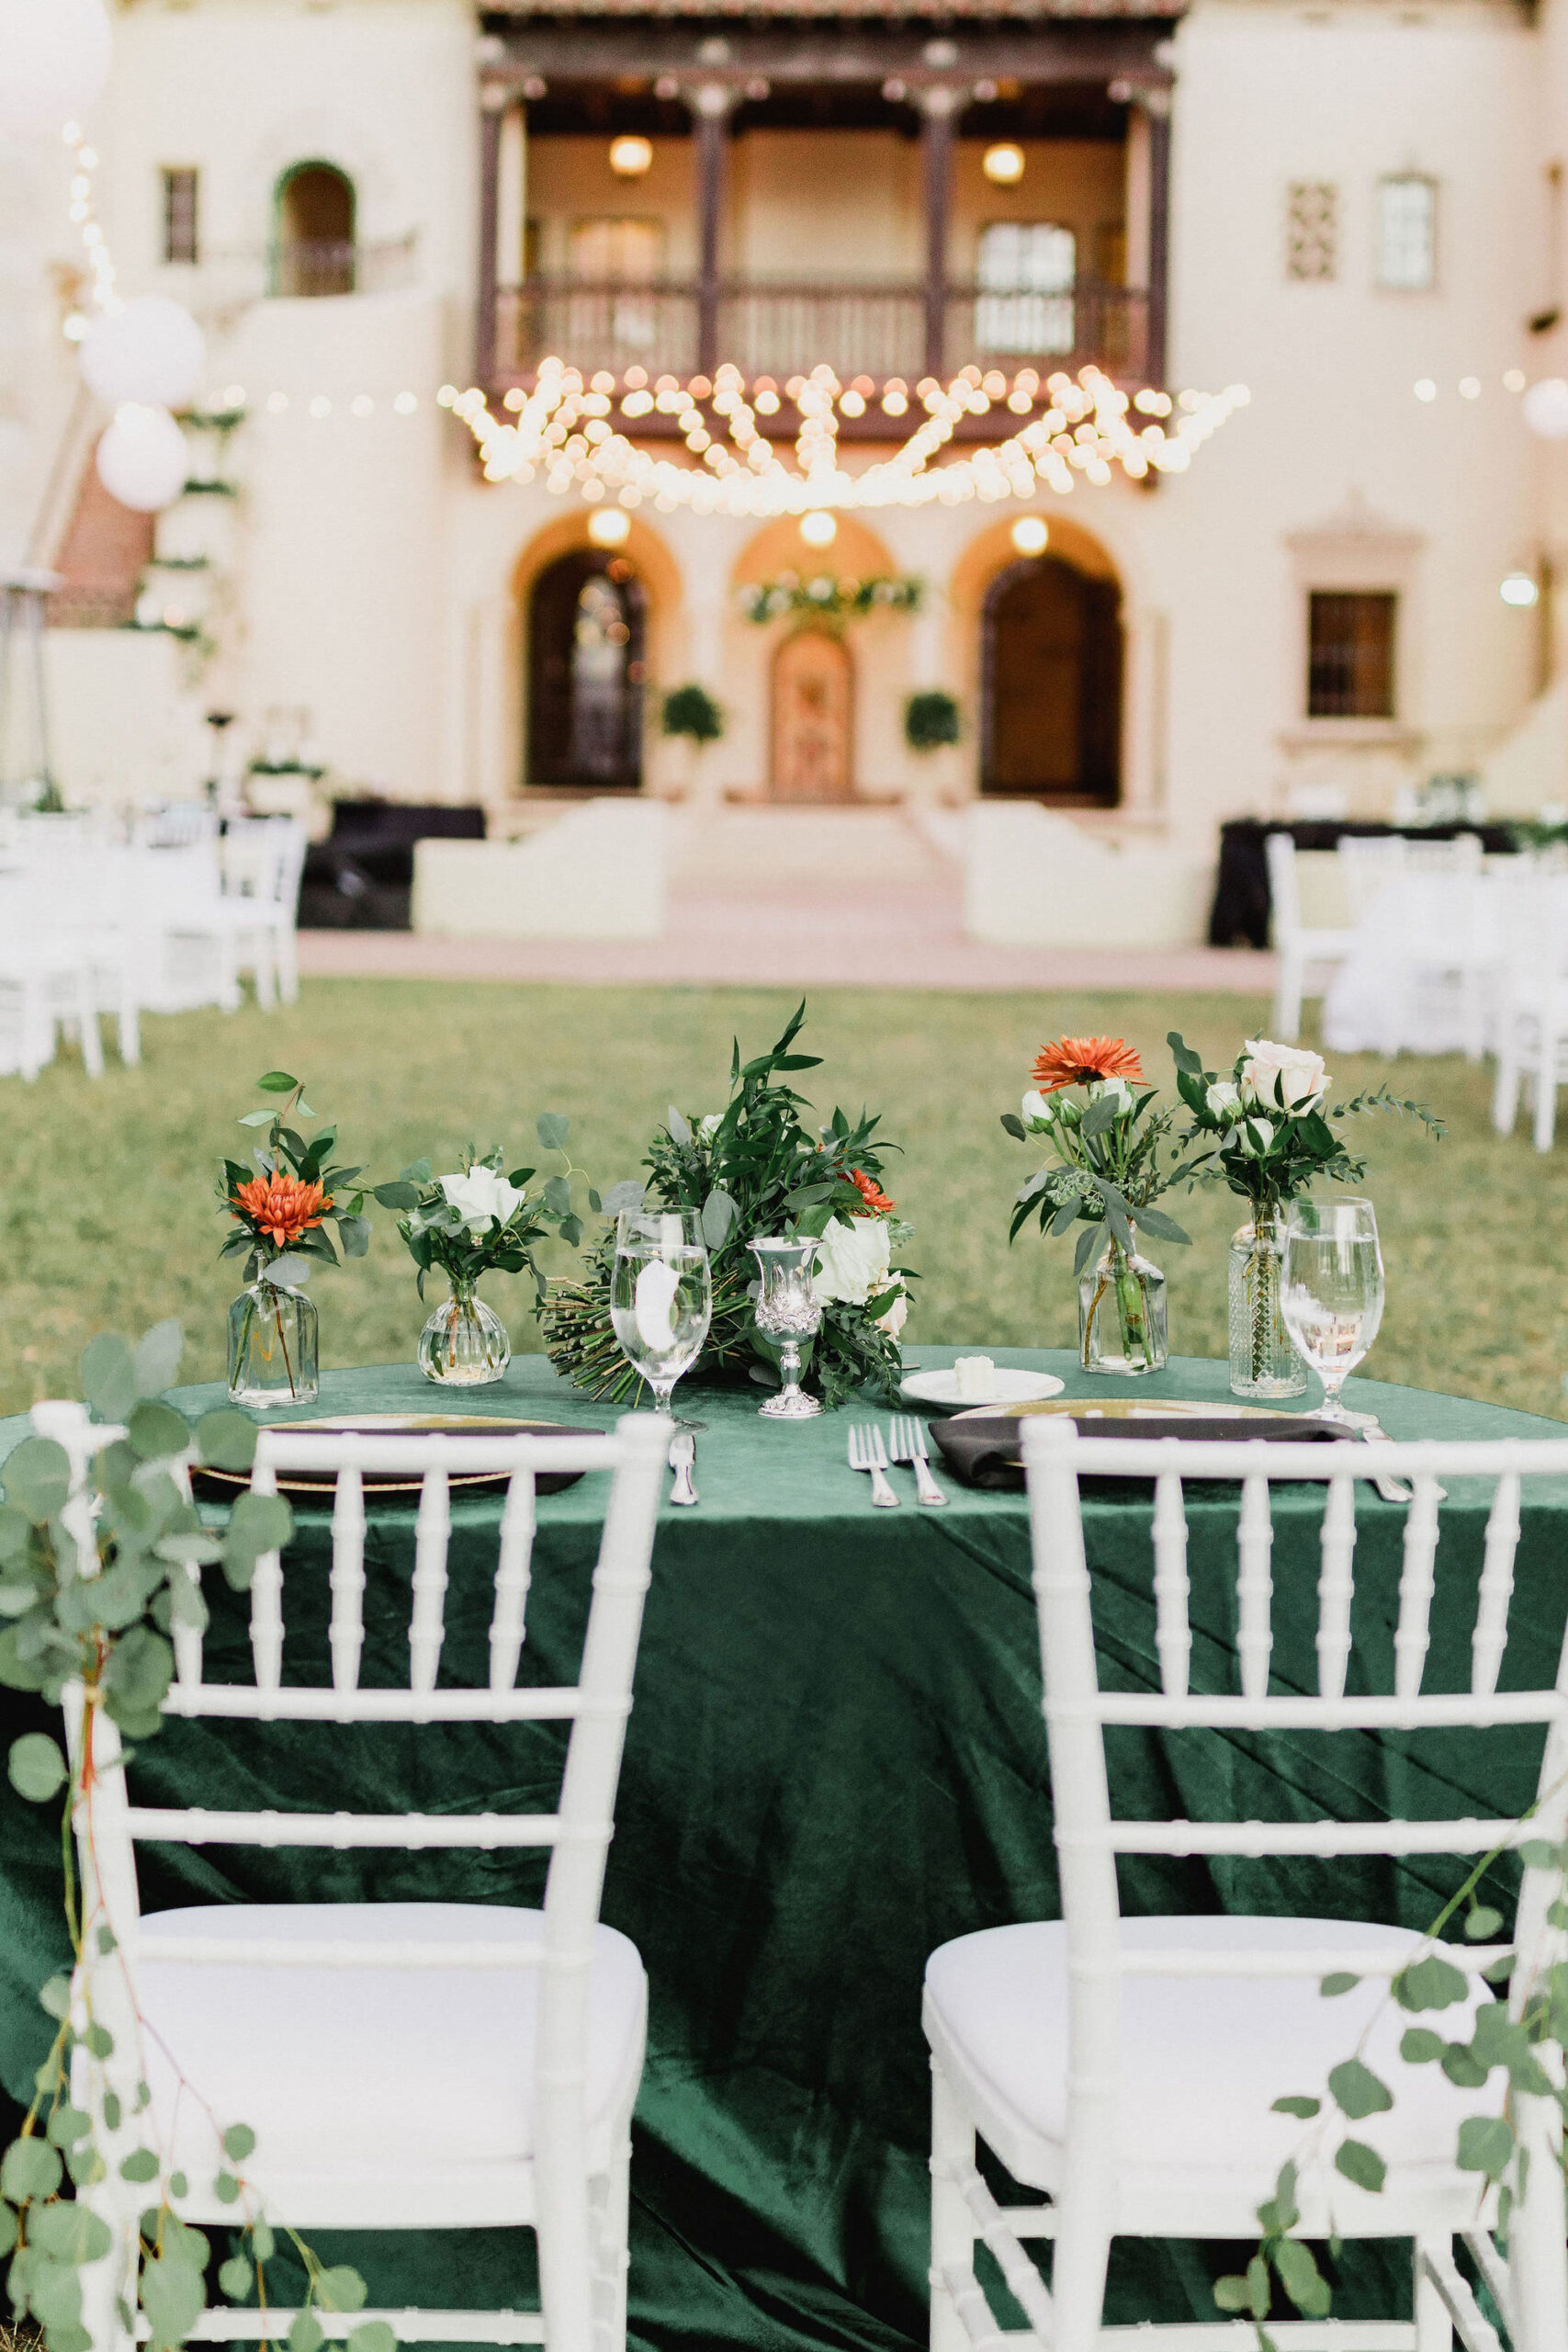 Dark Green Sweetheart Table | Orange Chrysanthemum and White Roses with Greenery Floral Centerpiece Arrangement Ideas